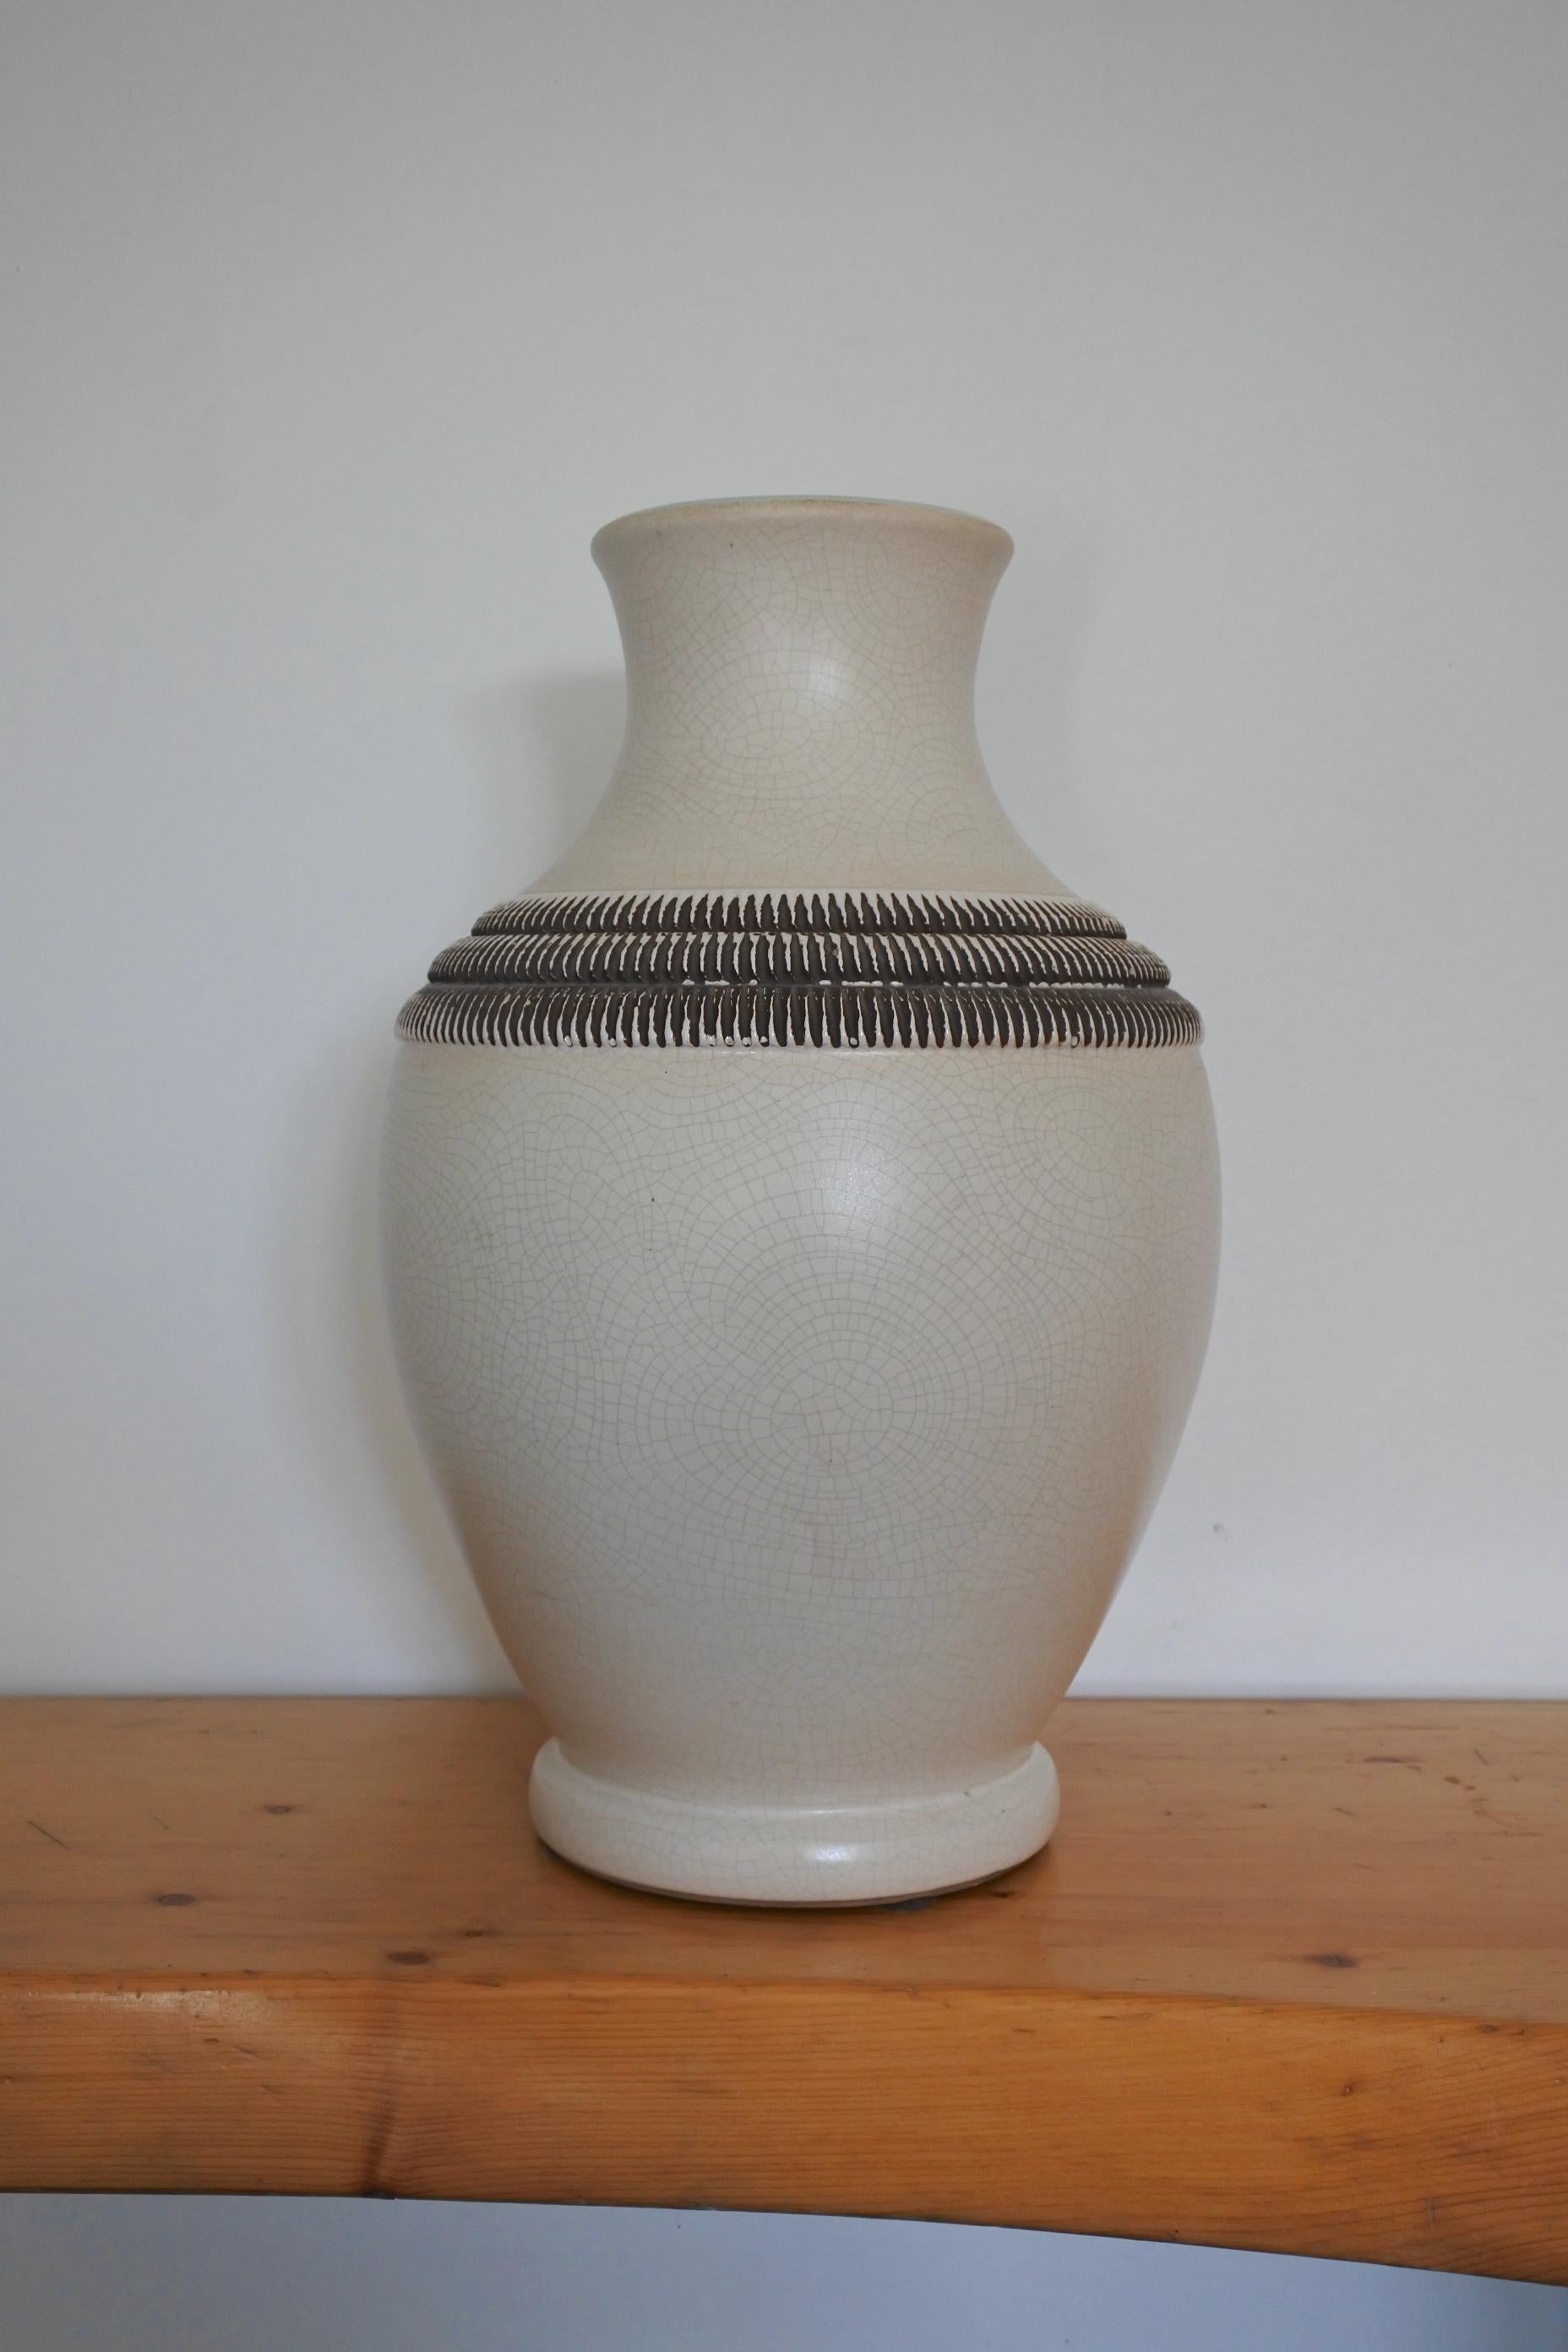 Ceramic vase by renowned French potter Pol Chambost.
Signed.
Mint condition.
  